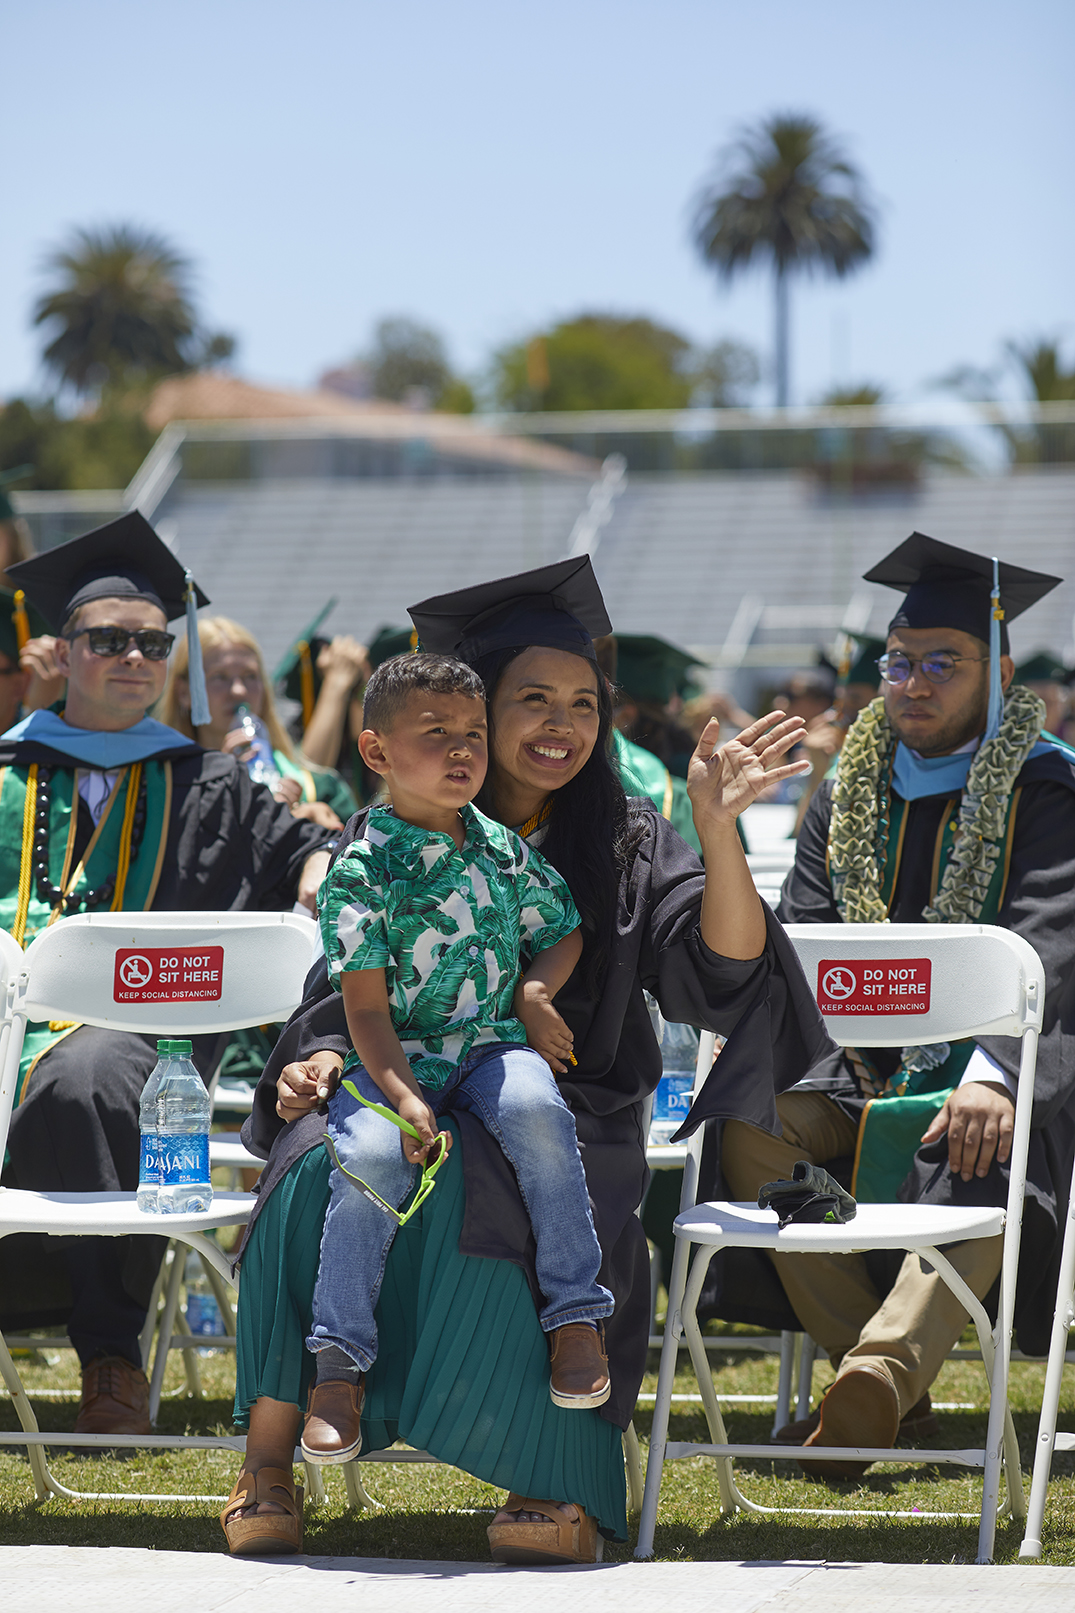 A graduating student smiles as she sits with fellow graduates. Her young child is on her lap.